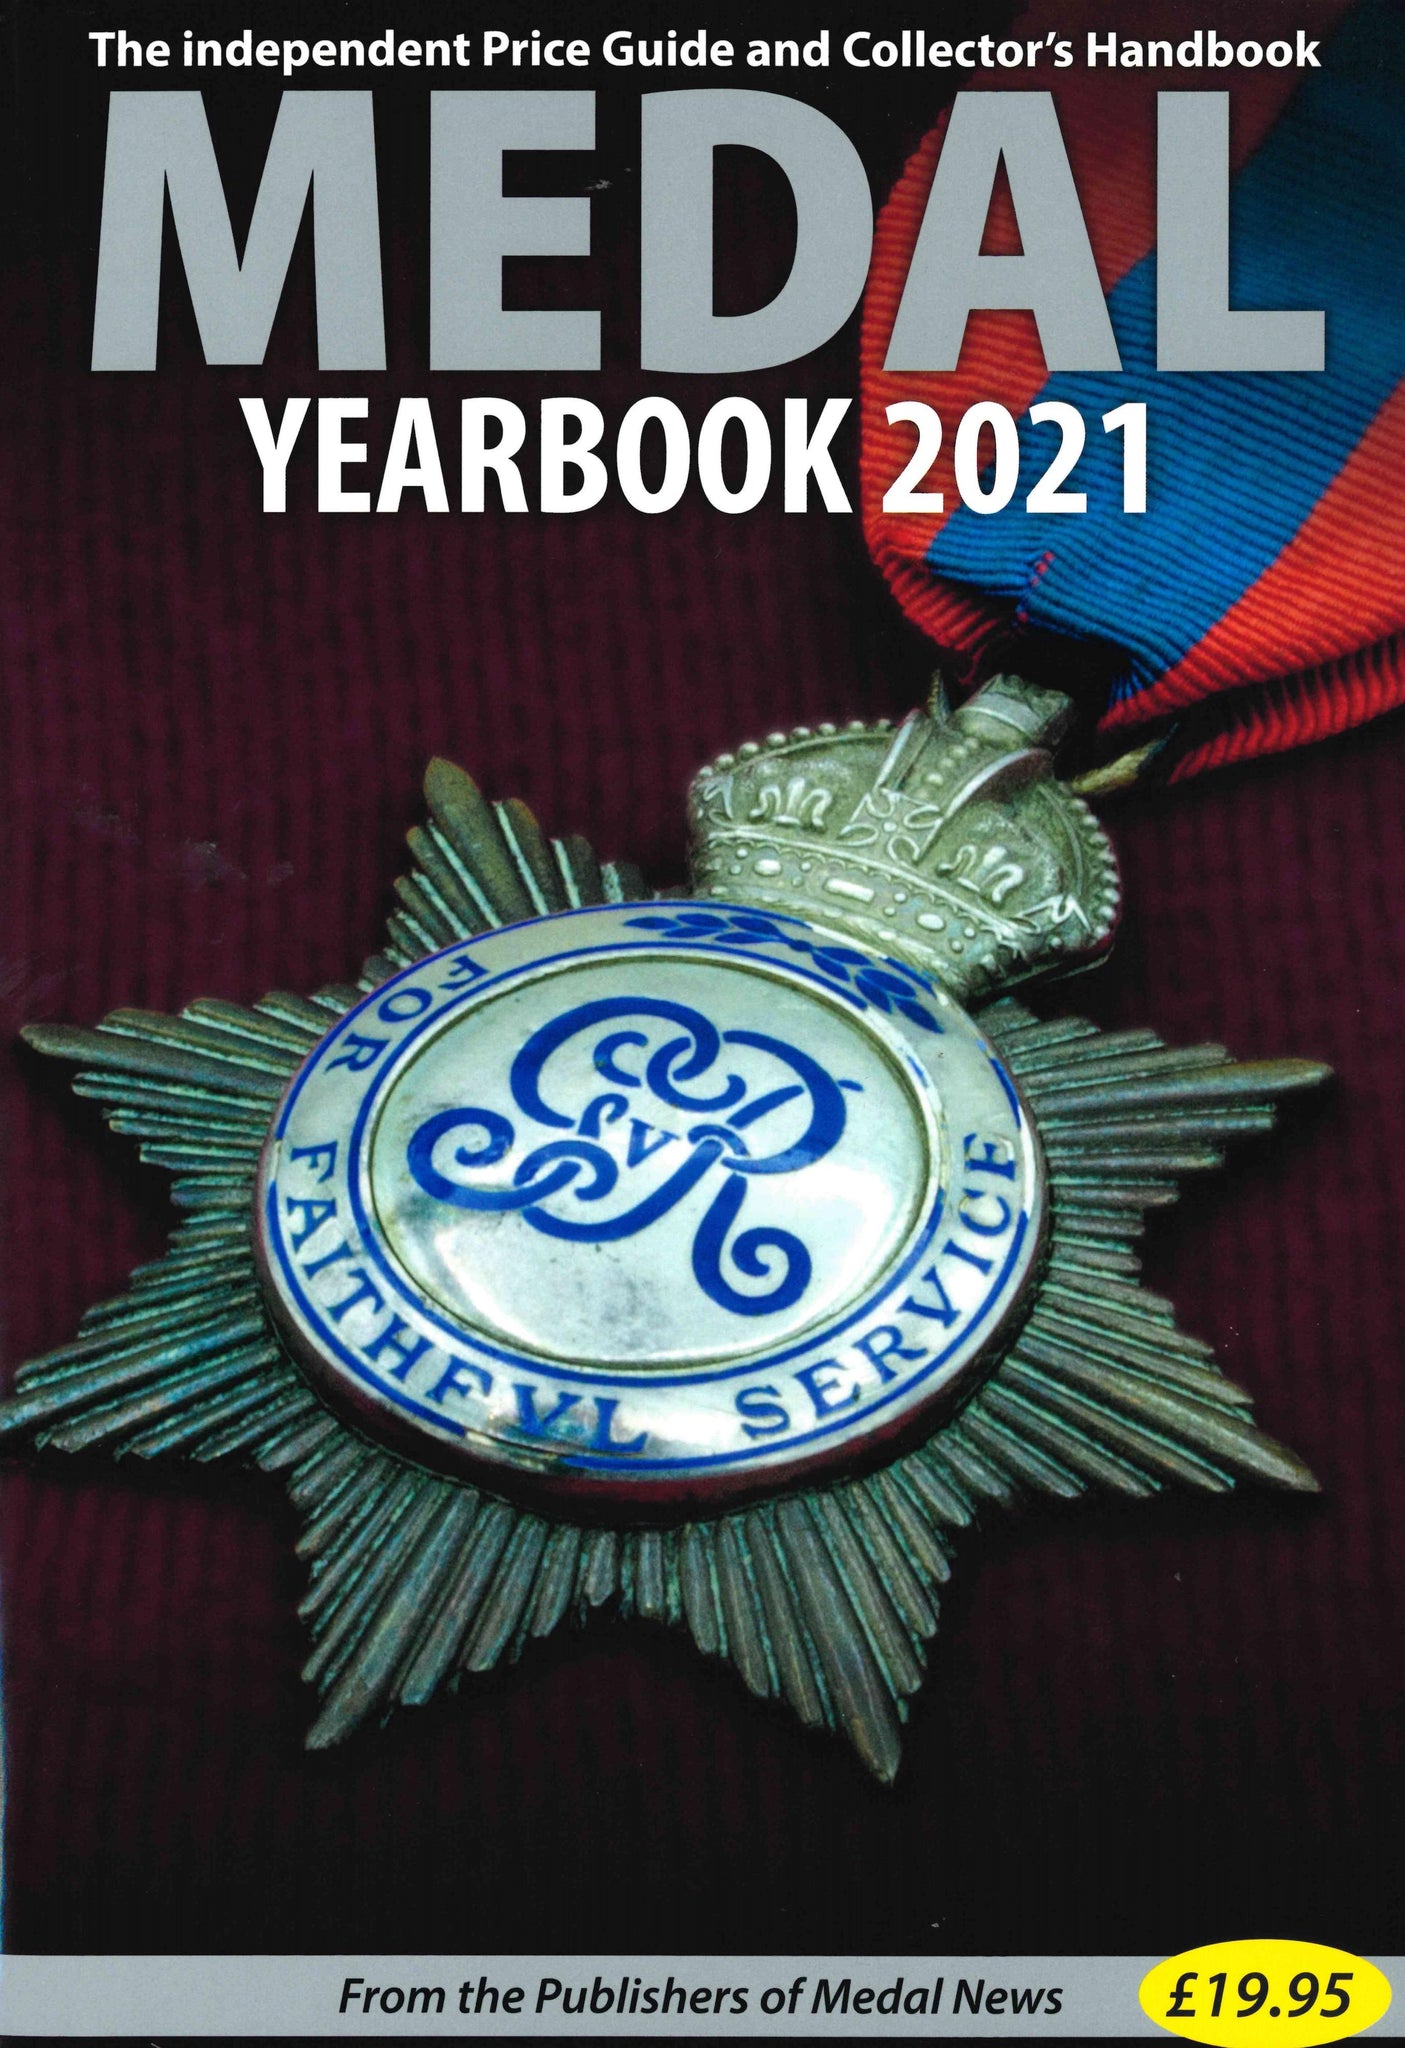 The Medal Yearbook 2021